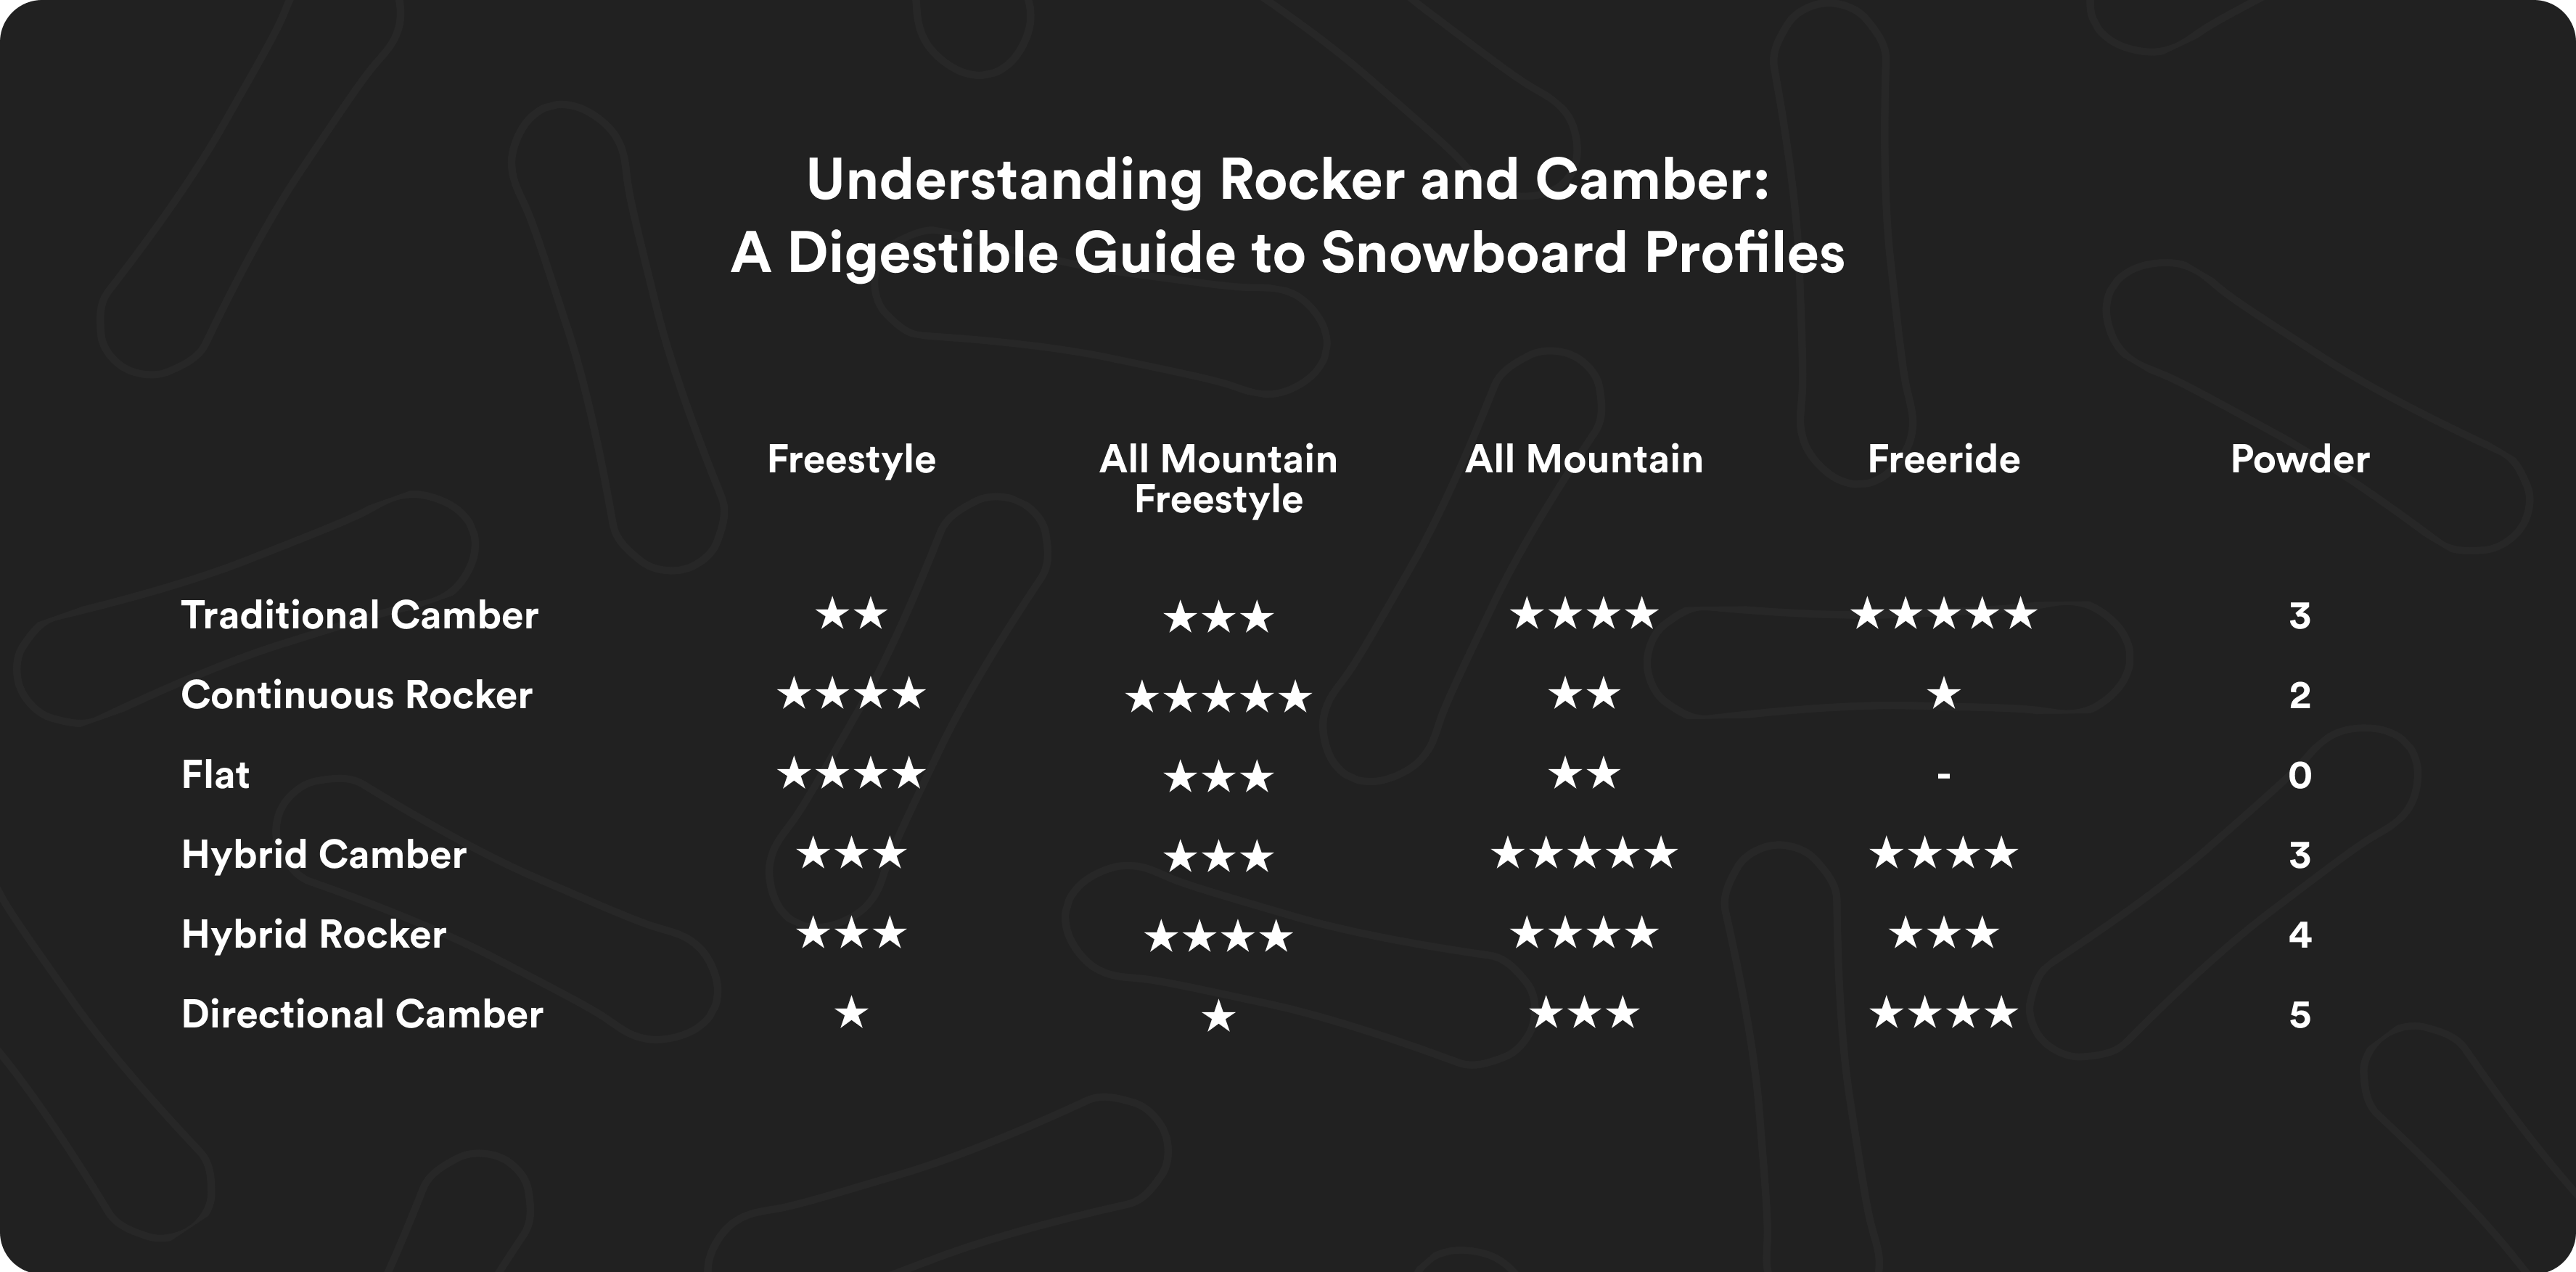 A graphic rating snowboard profiles by snowboard type.